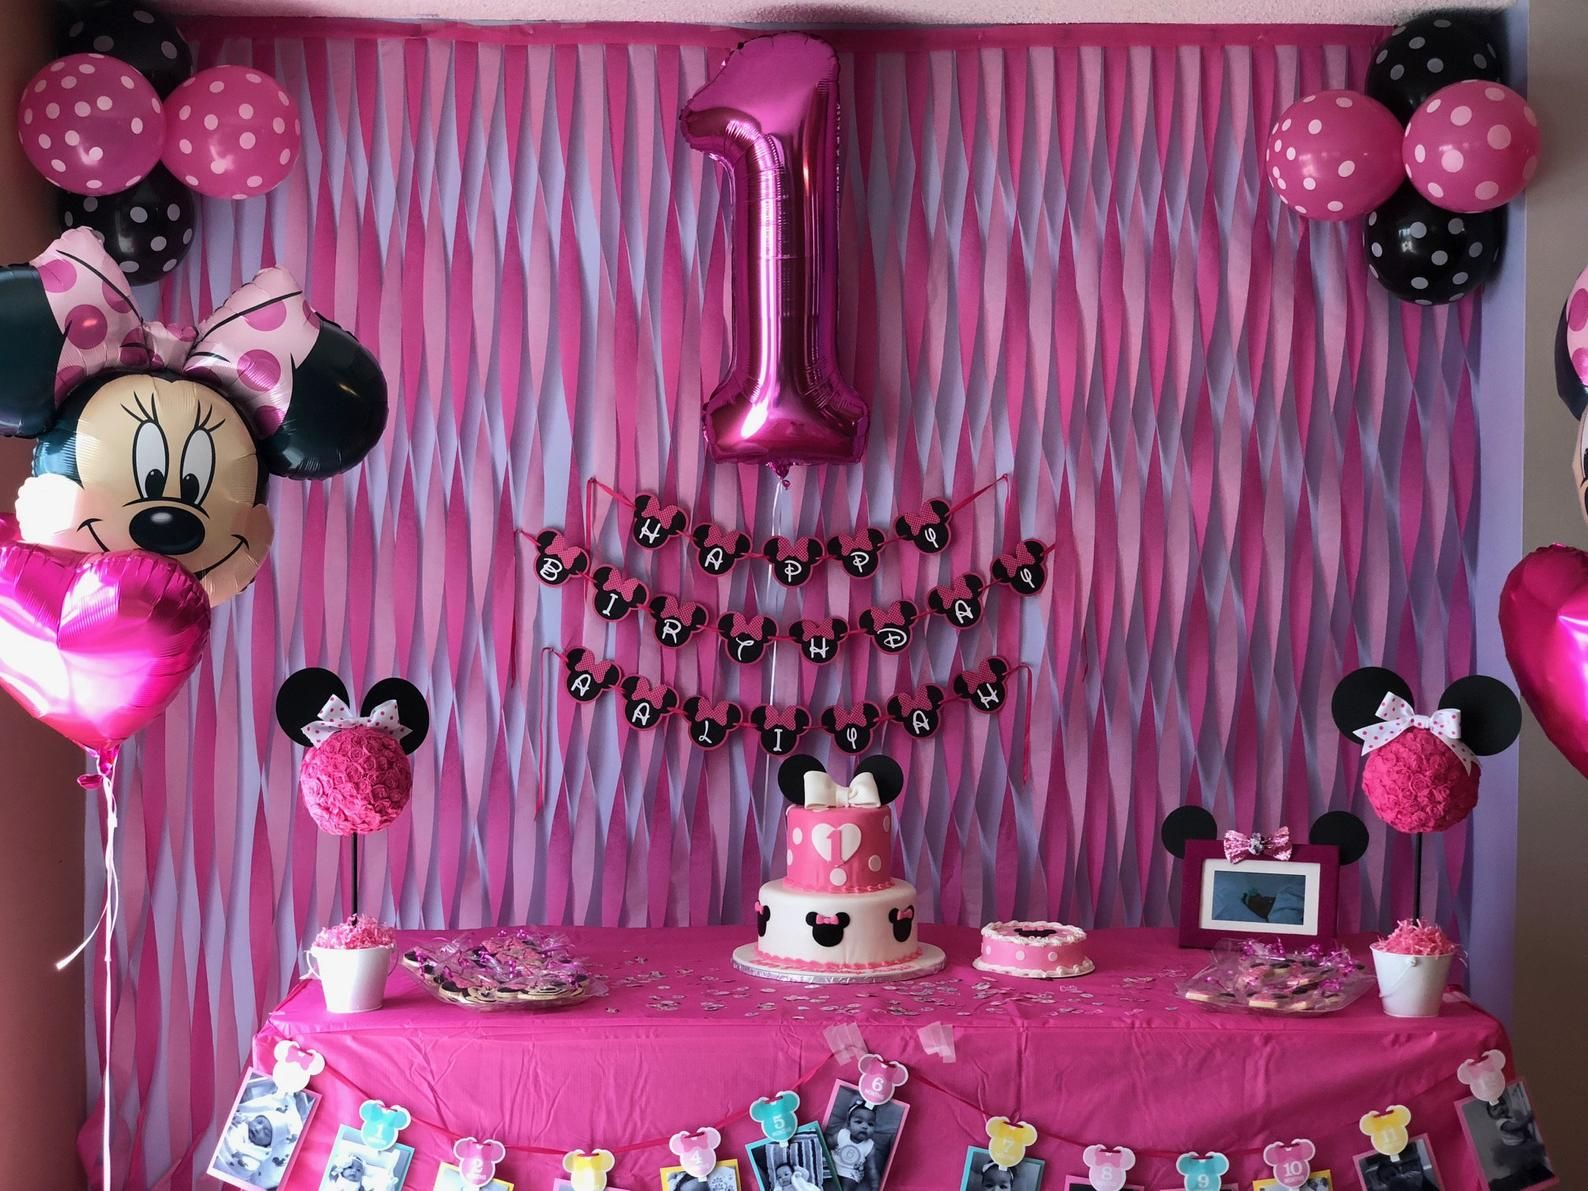 Minnie-mouse-themed birthday party for all ages